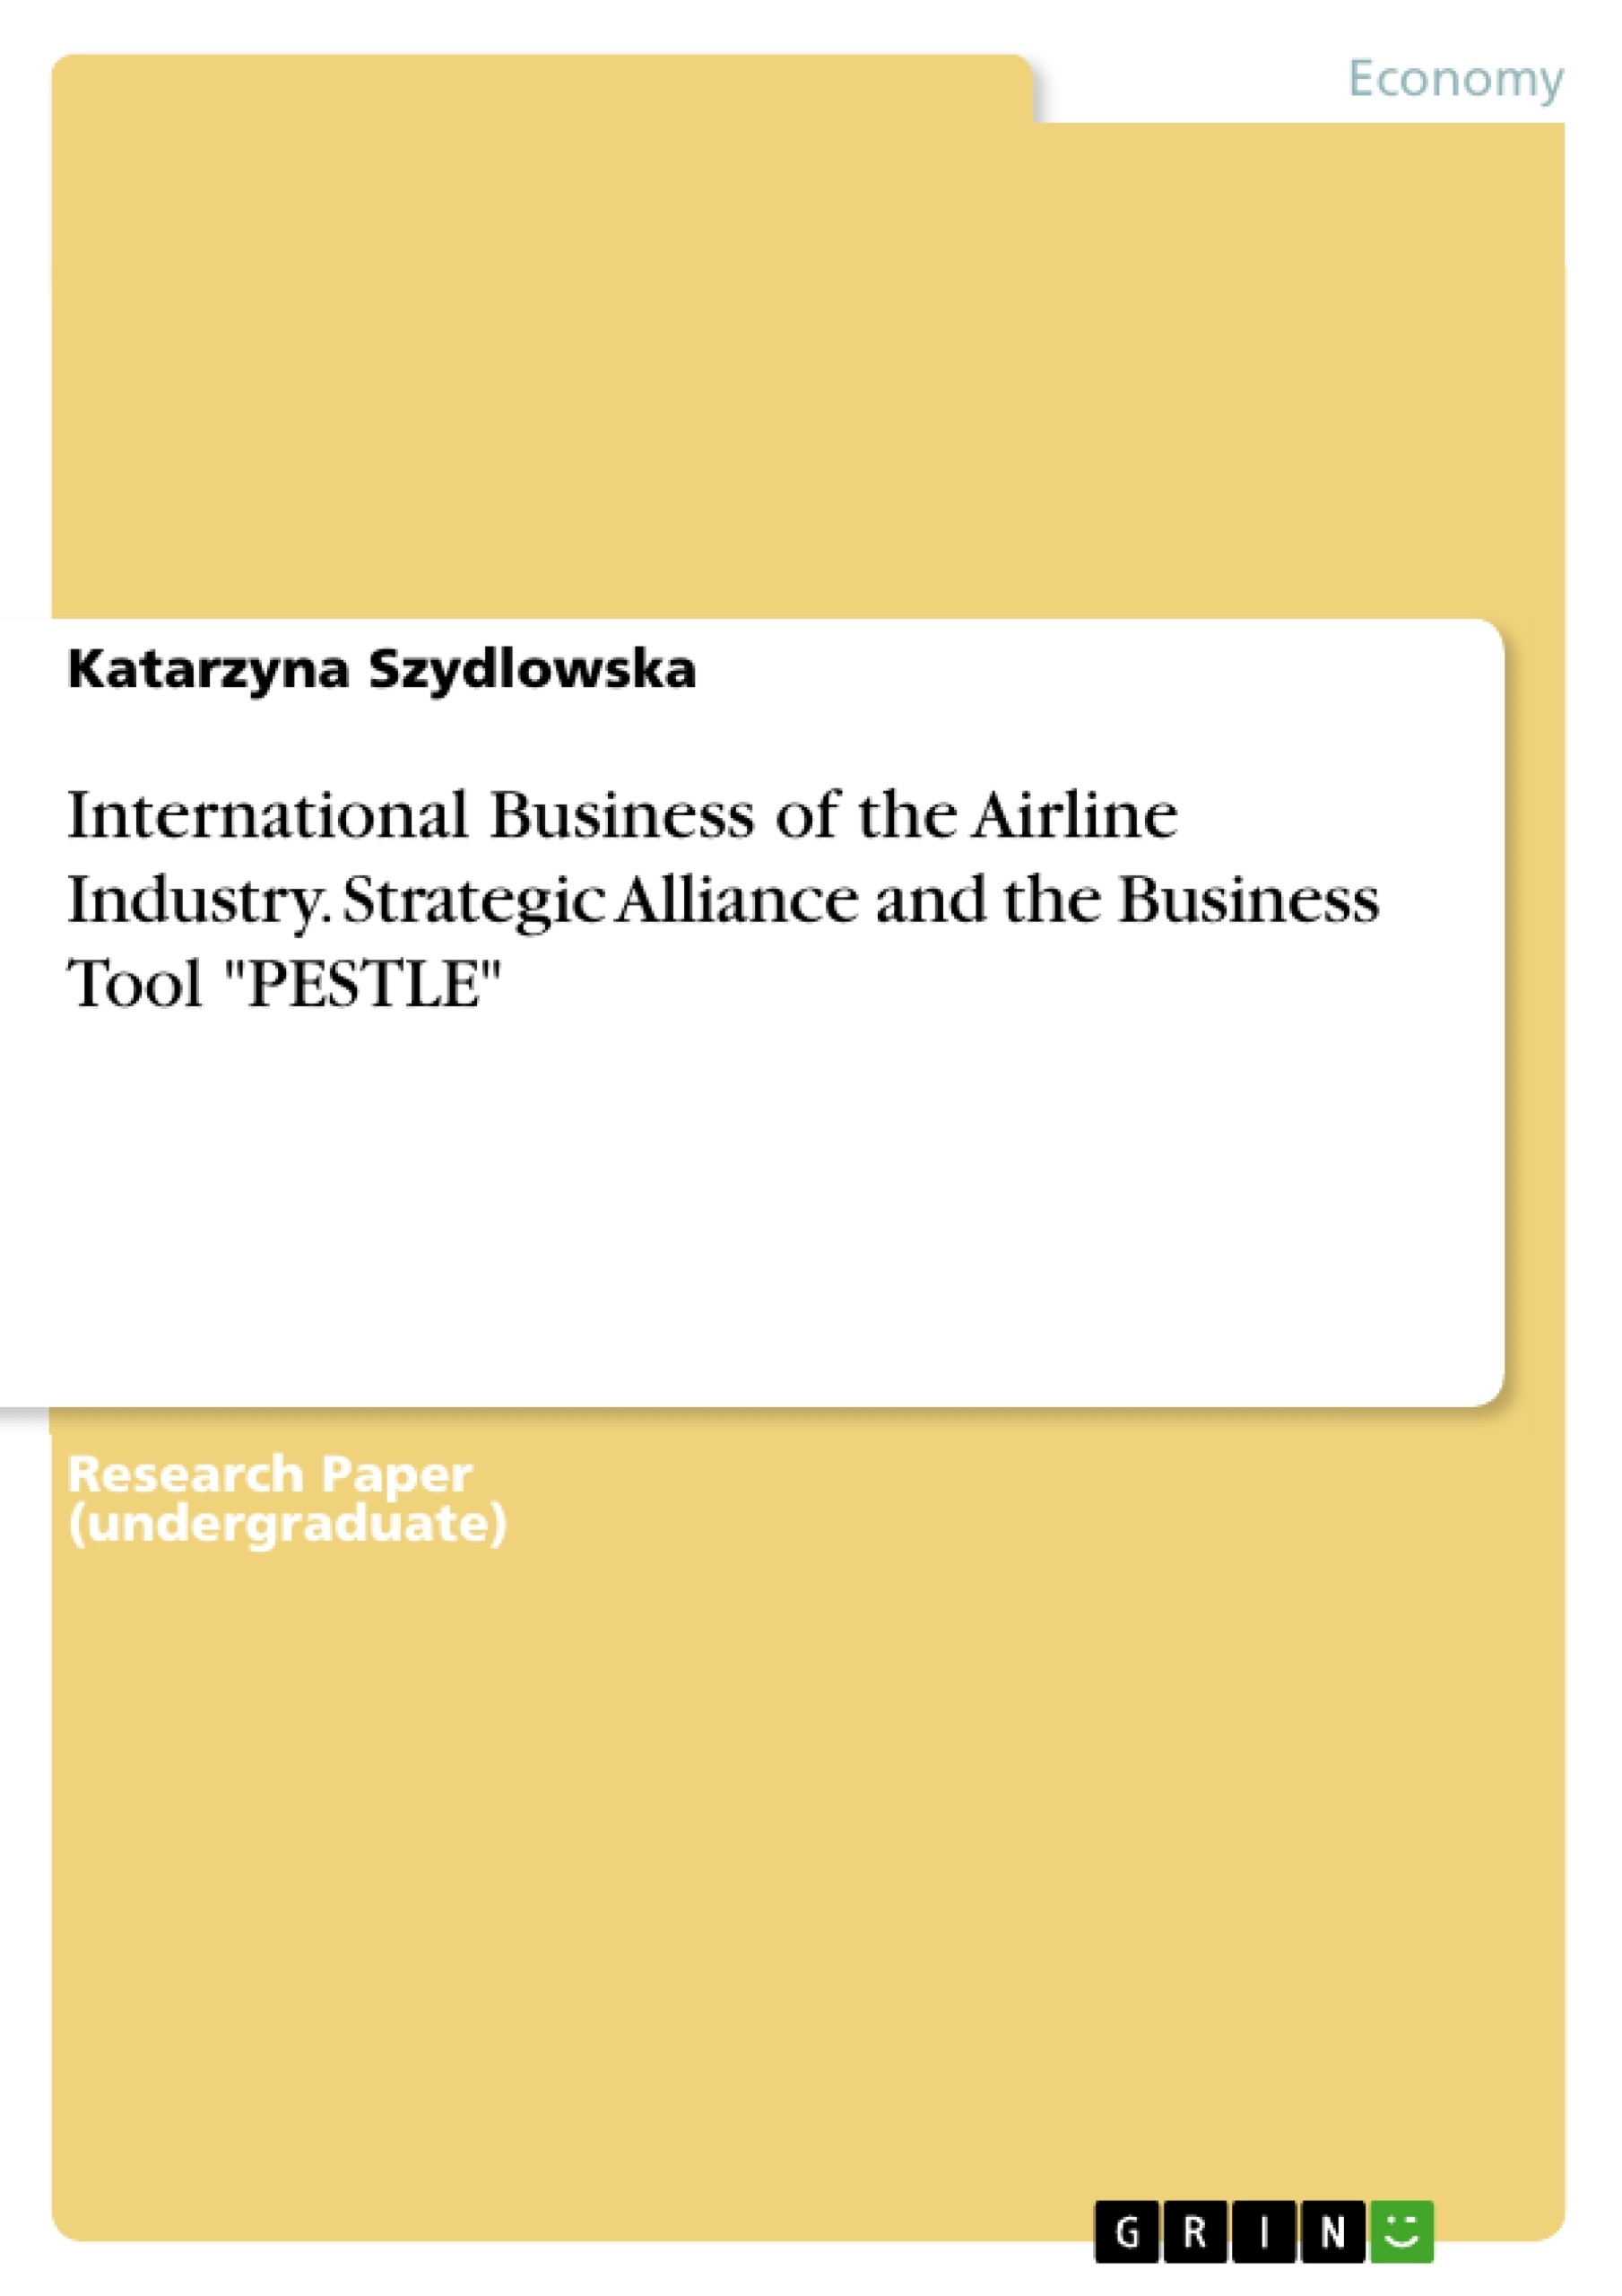 Título: International Business of the Airline Industry. Strategic Alliance and the Business Tool "PESTLE"